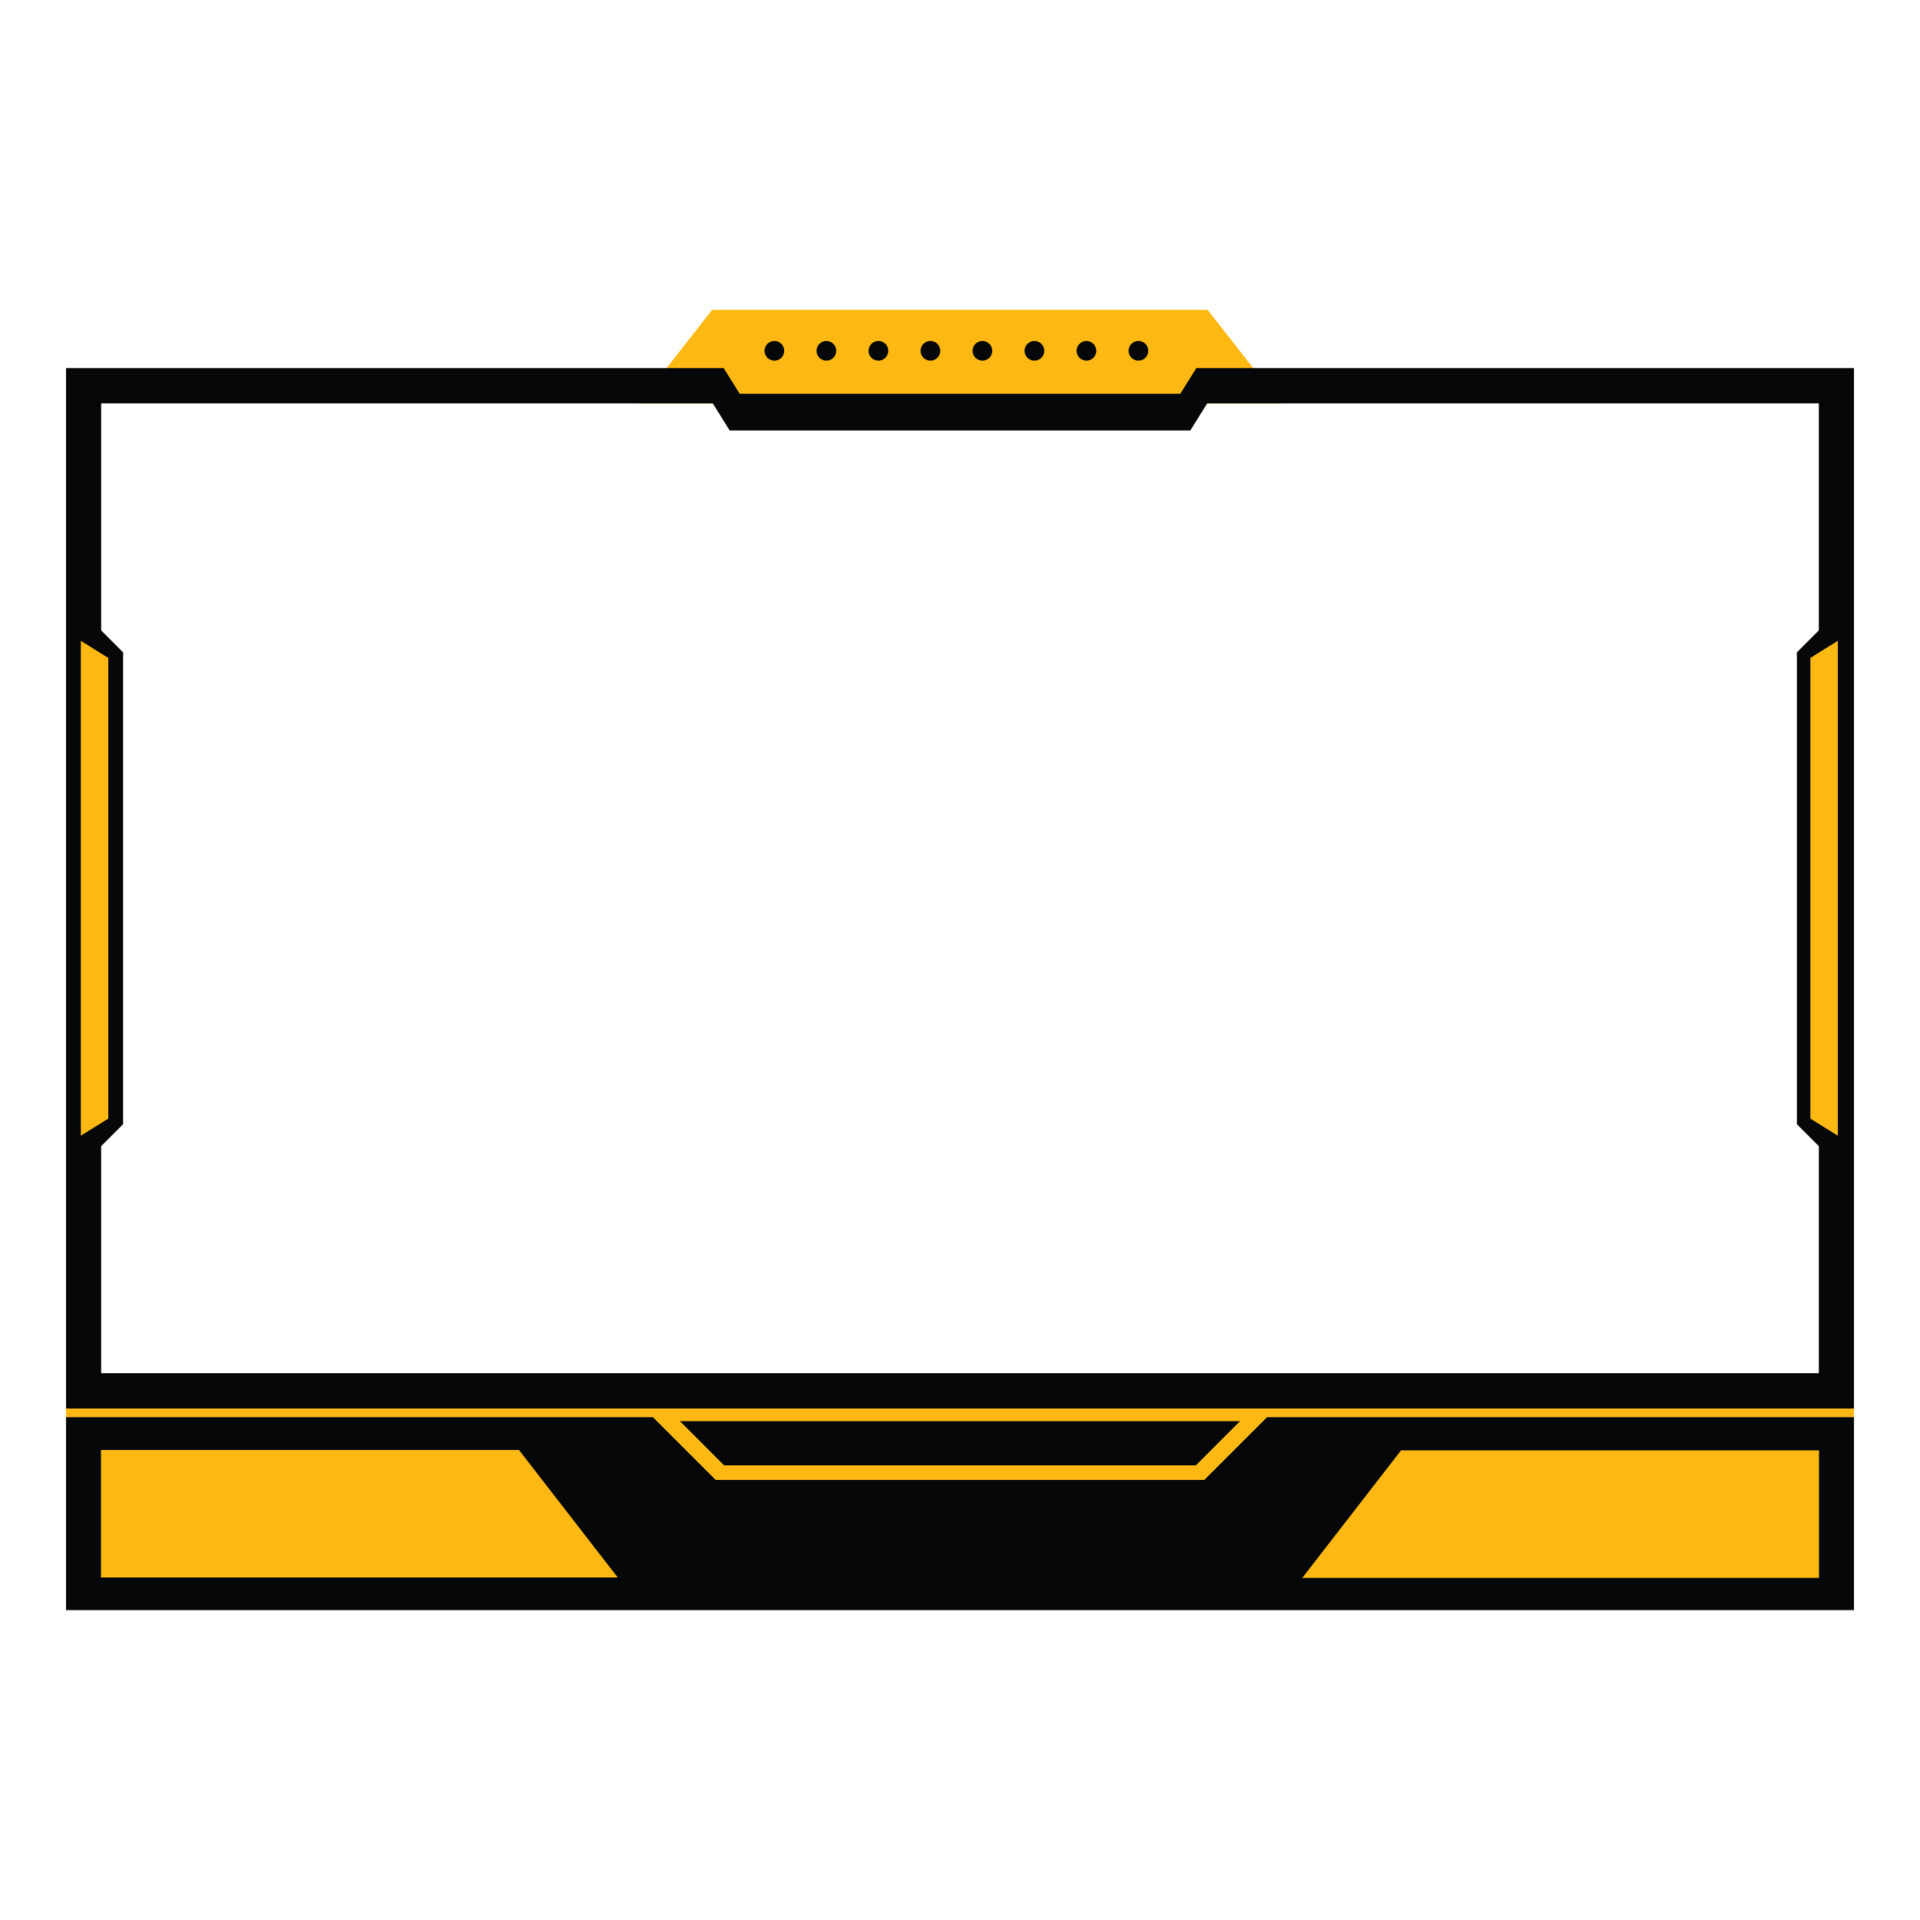 Live streaming overlay frame. Game screen overlay for live game streamers. Stylish dark black and rusty yellow color overlay frame